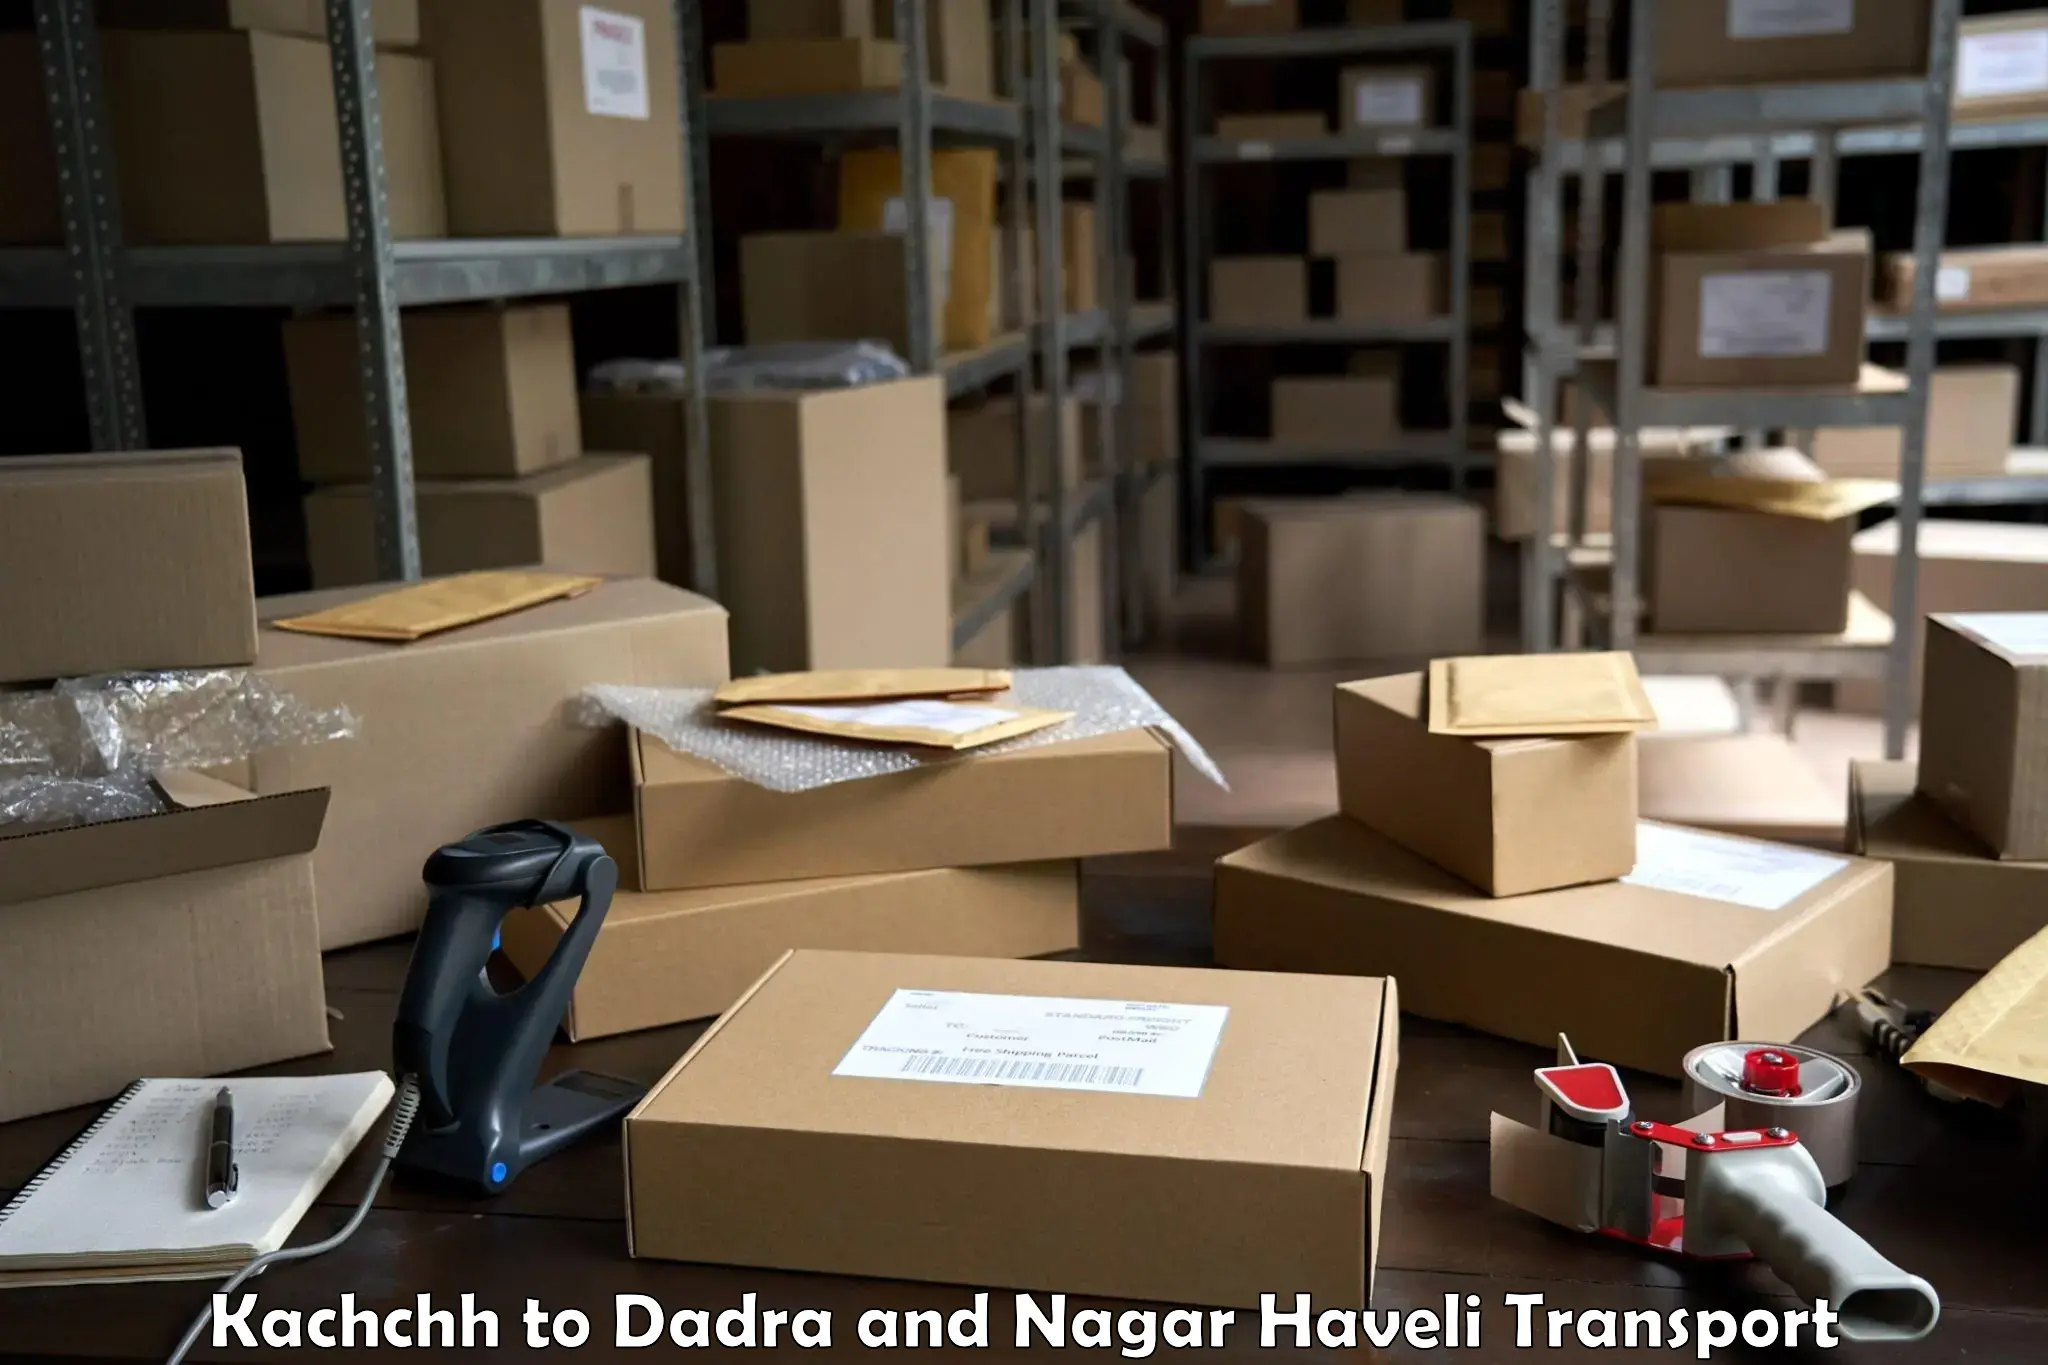 Commercial transport service Kachchh to Dadra and Nagar Haveli